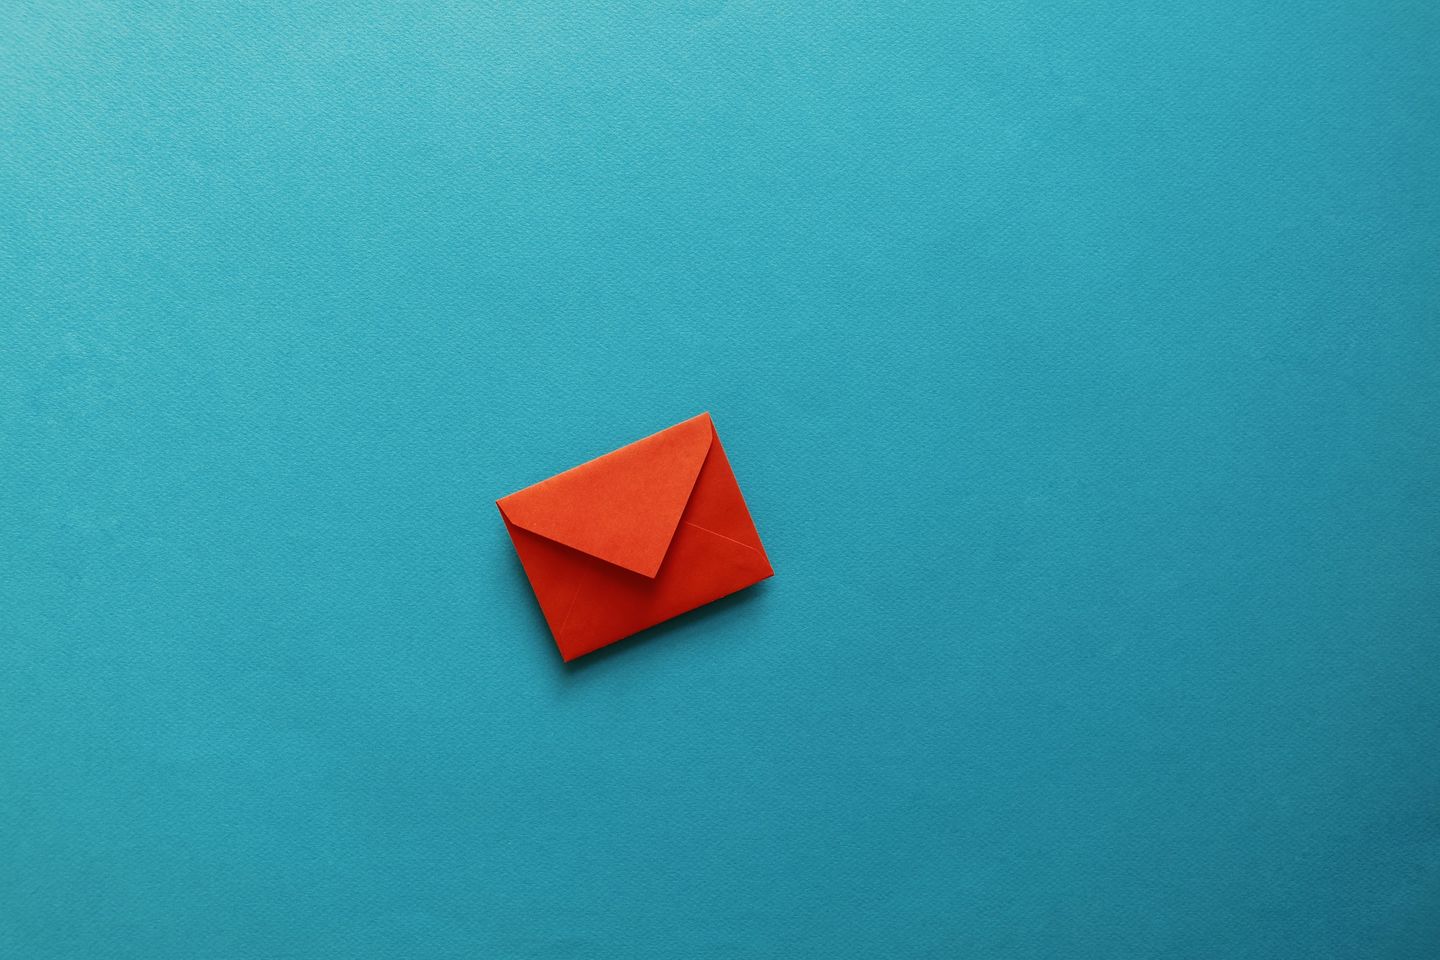 Application for your studies at the HWR Berlin: a small red envelope lies on a turquoise surface. Photo: © tolgart/iStock/Getty Images Plus